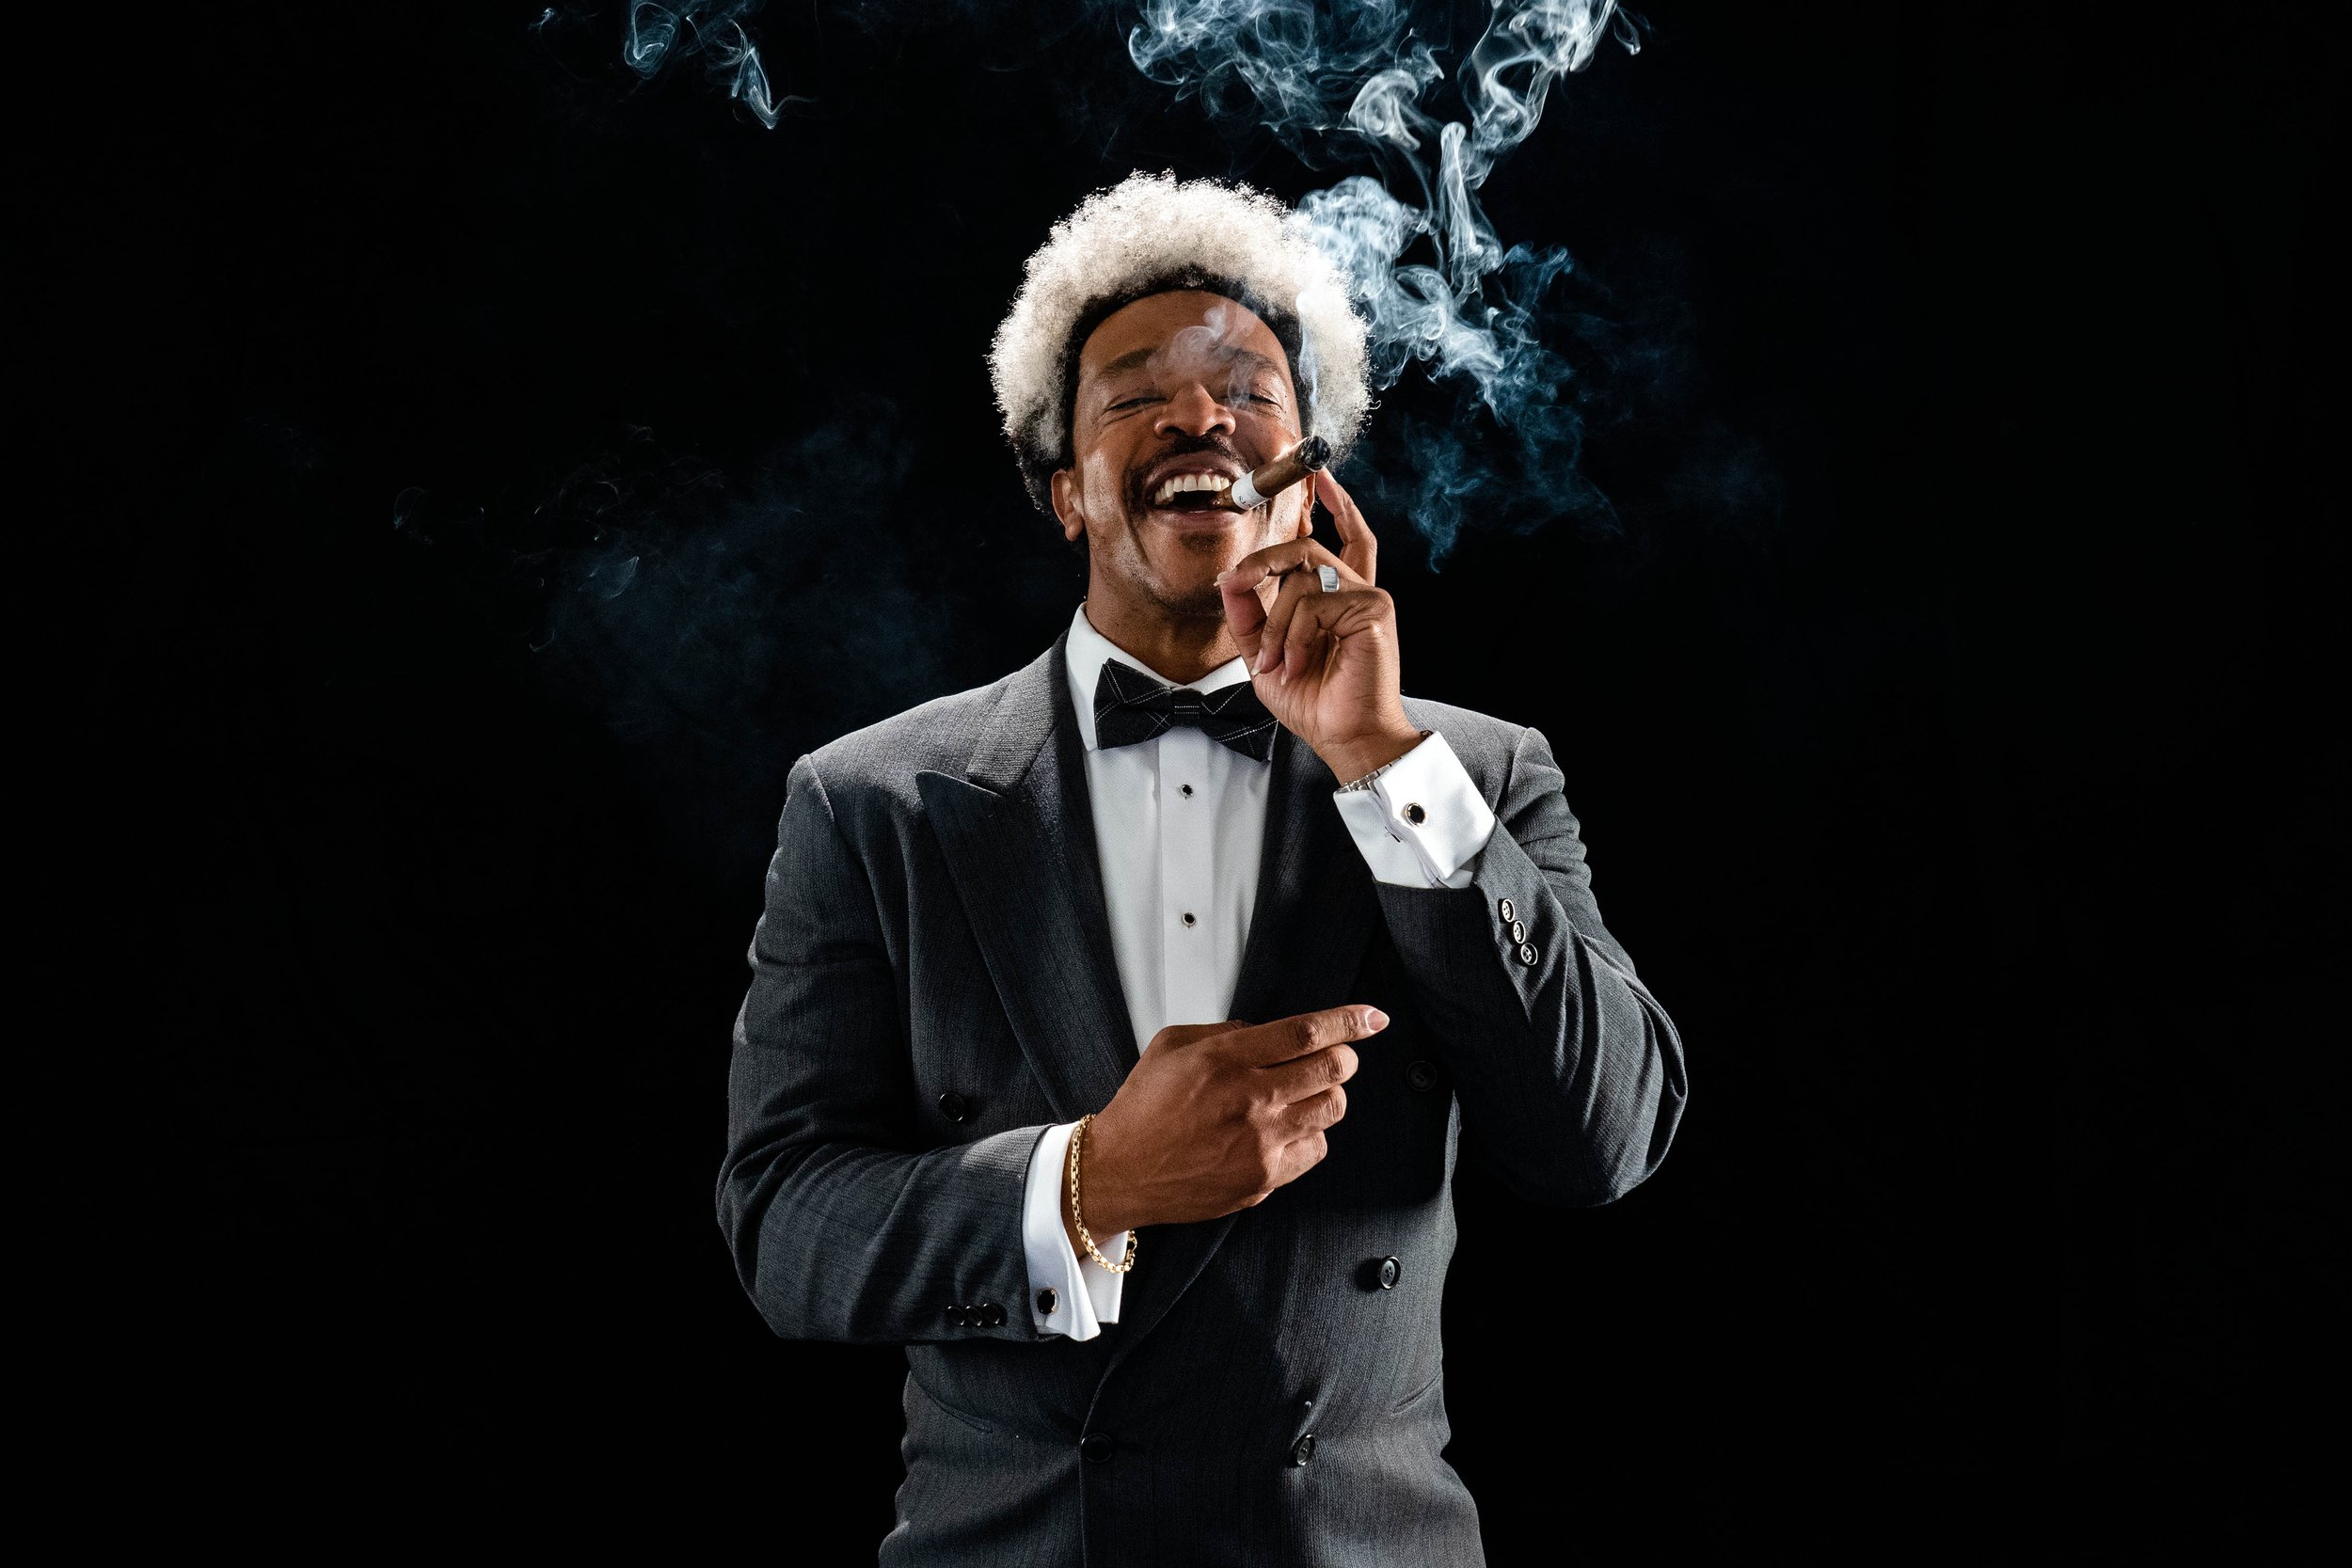  Russell Hornsby as Don King (Mike mini series)  Photo: Alfonso Bresciani/HULU 